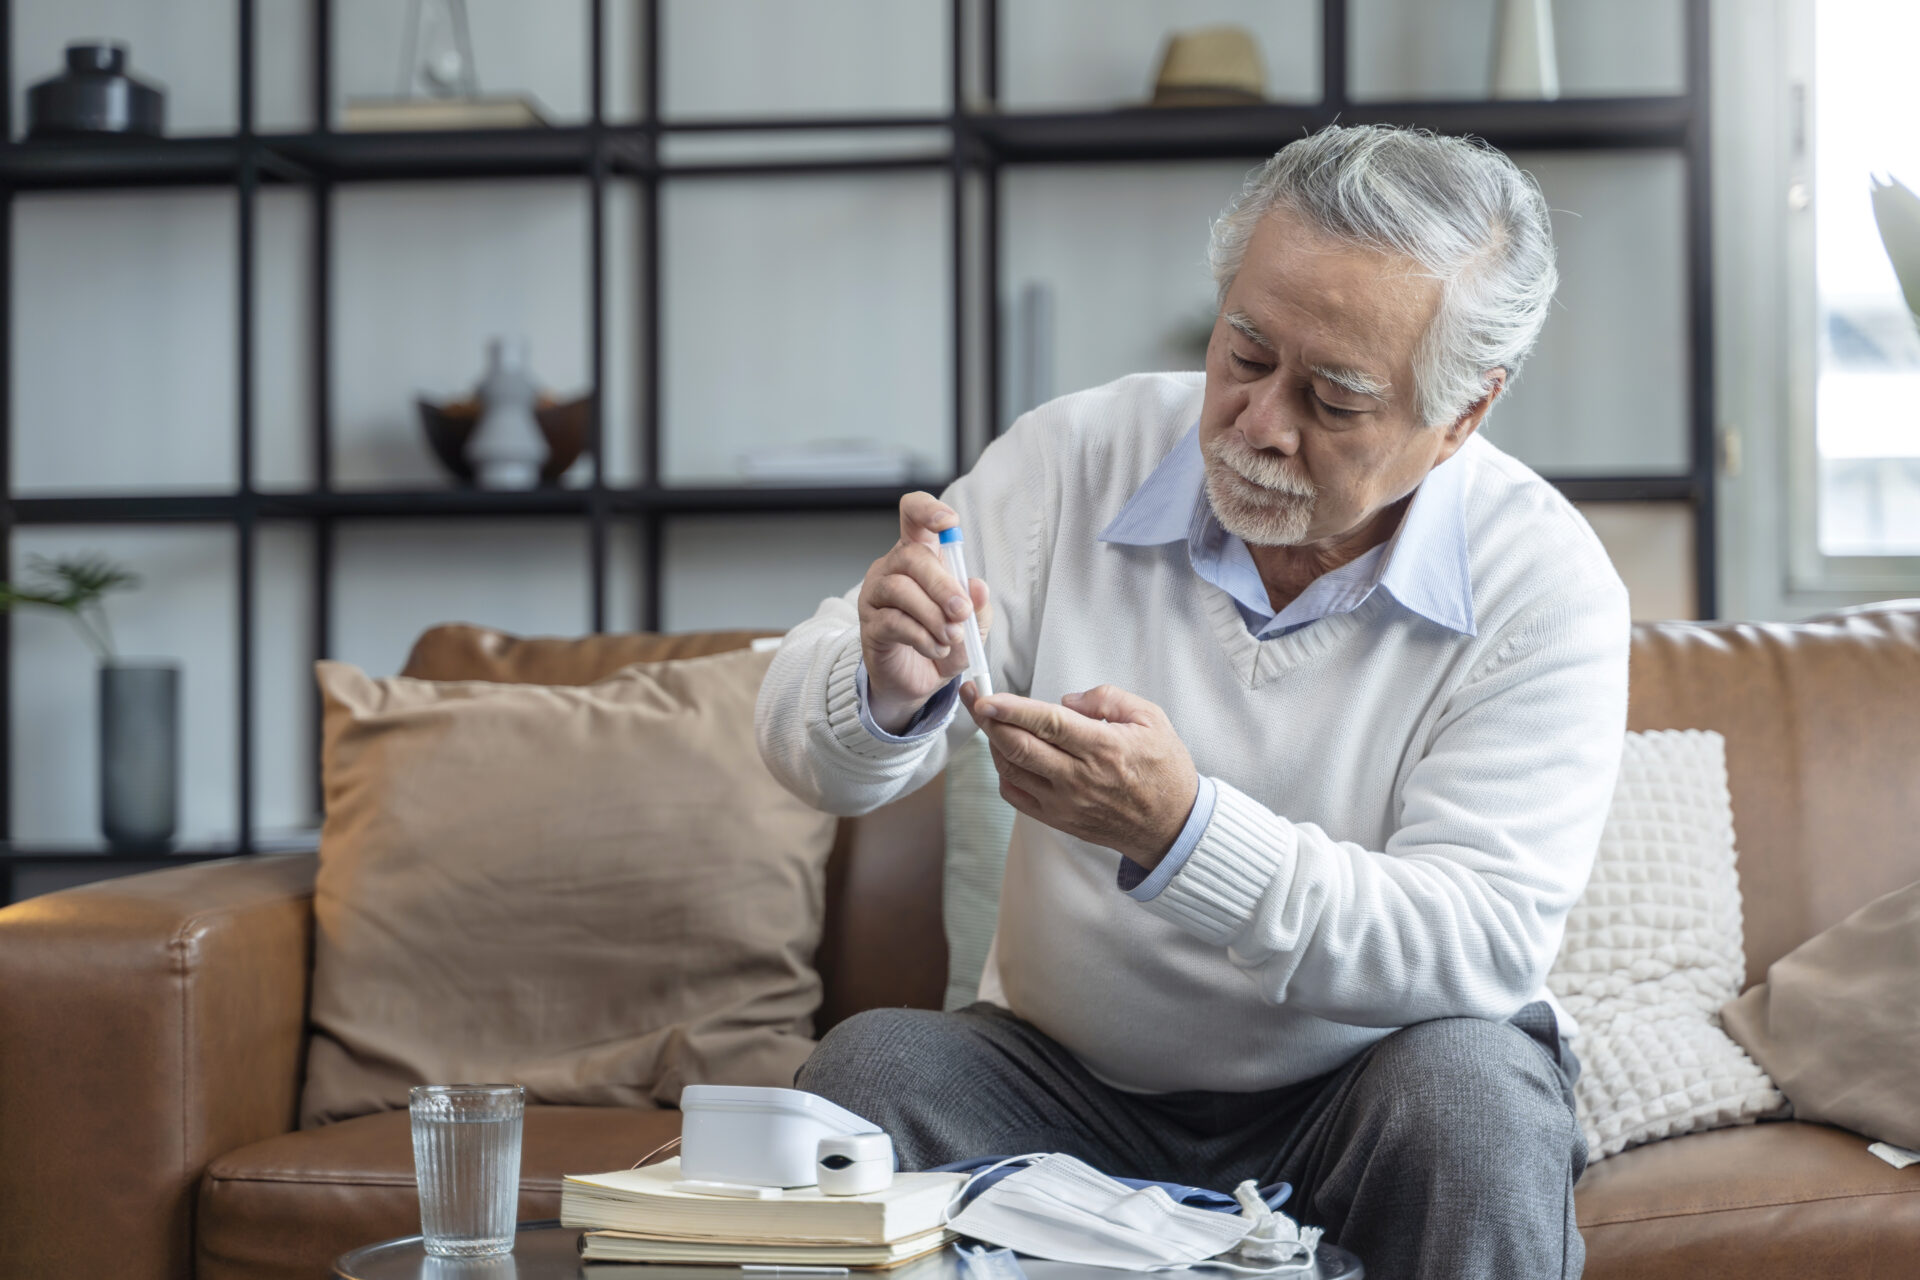 Diabetes Management for Older Adults: 7 Steps to Stable Blood Sugar